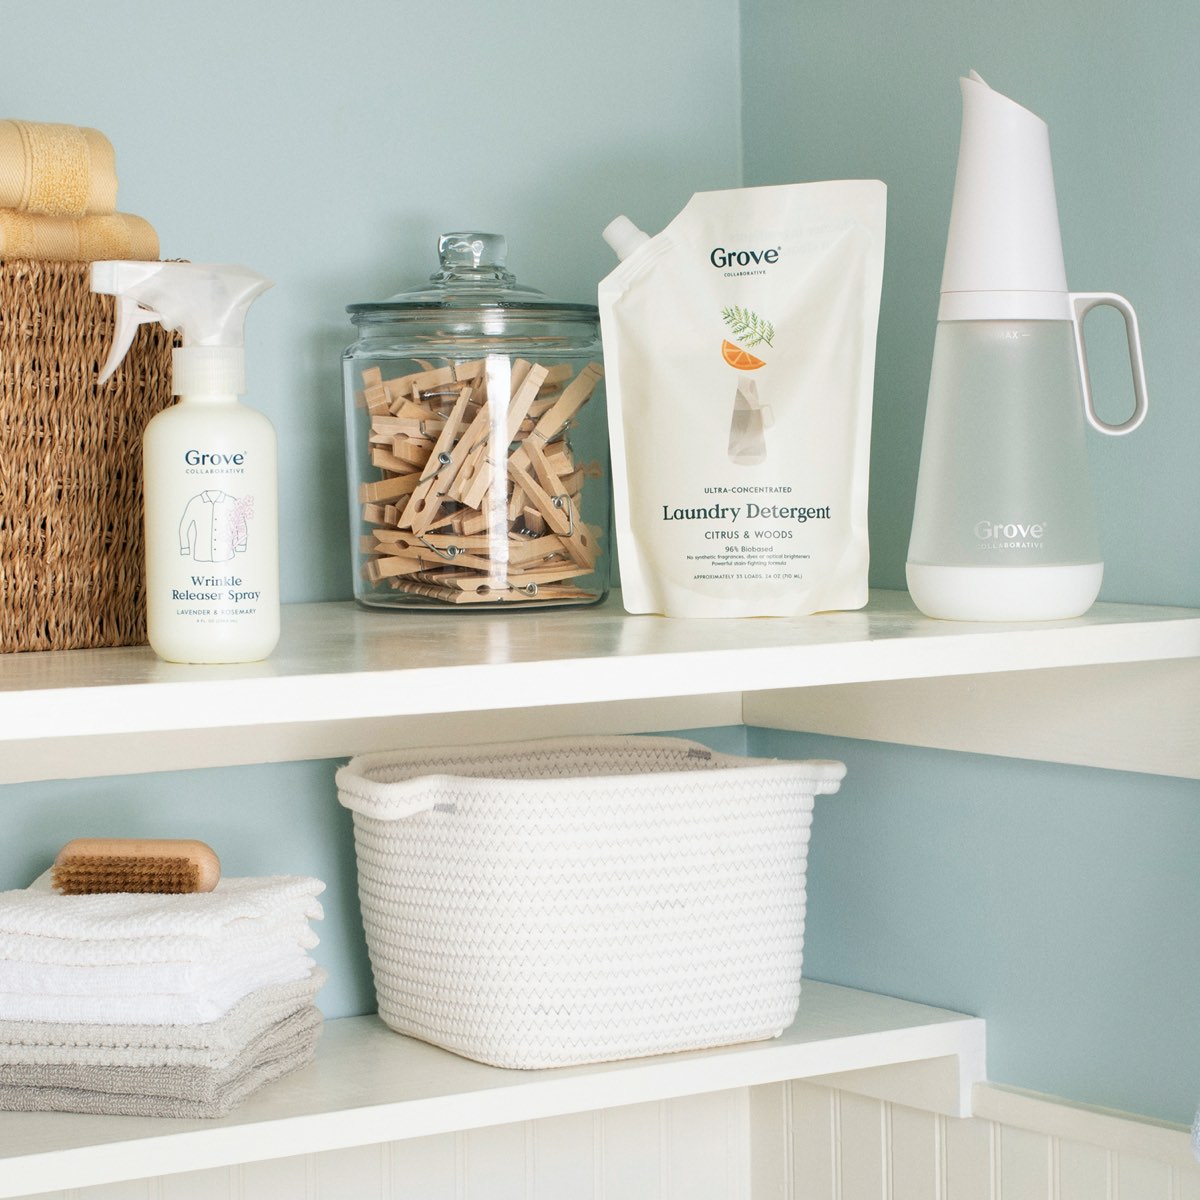 Laundry room shelves with wrinkle release spray and clothespins